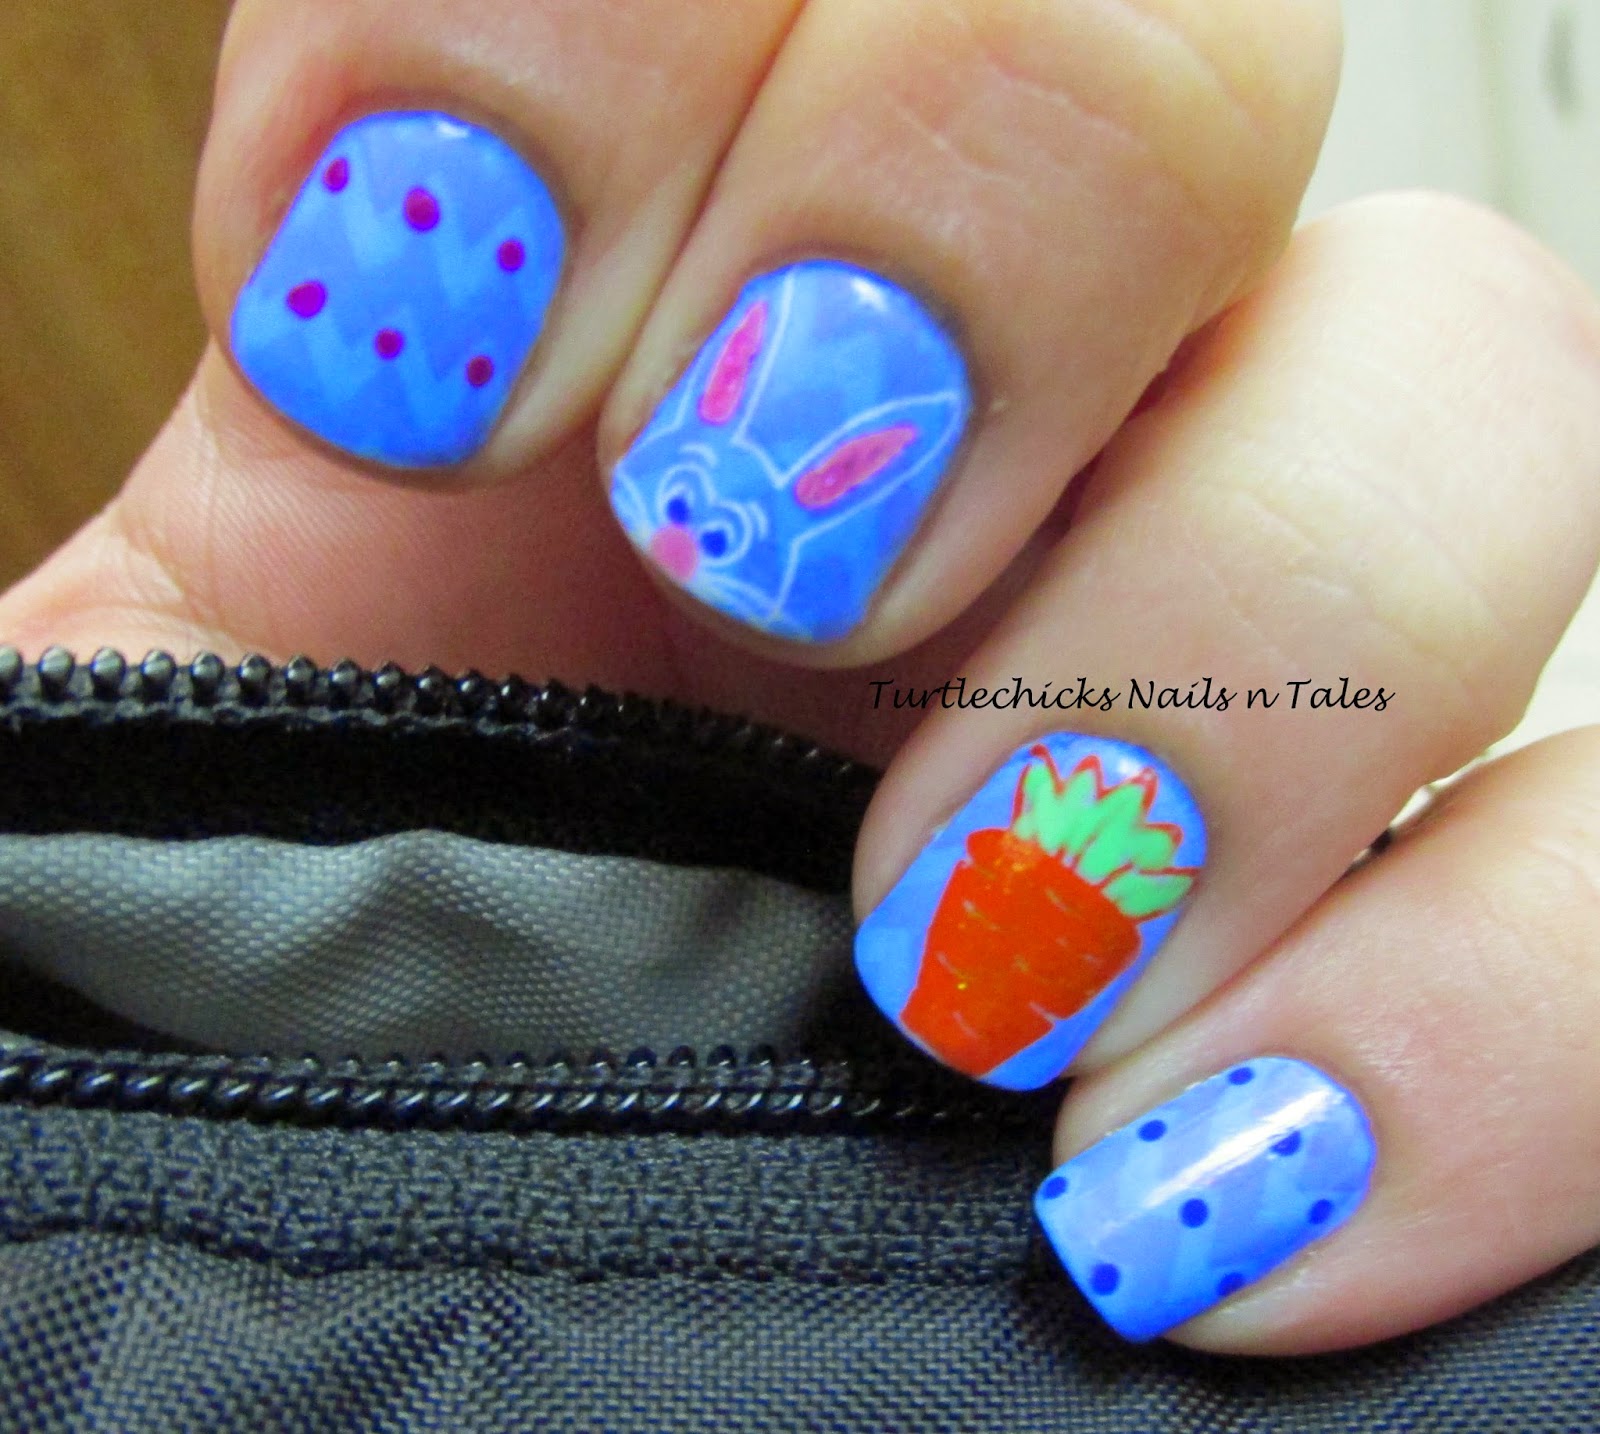 Turtlechick's Nails N Tales